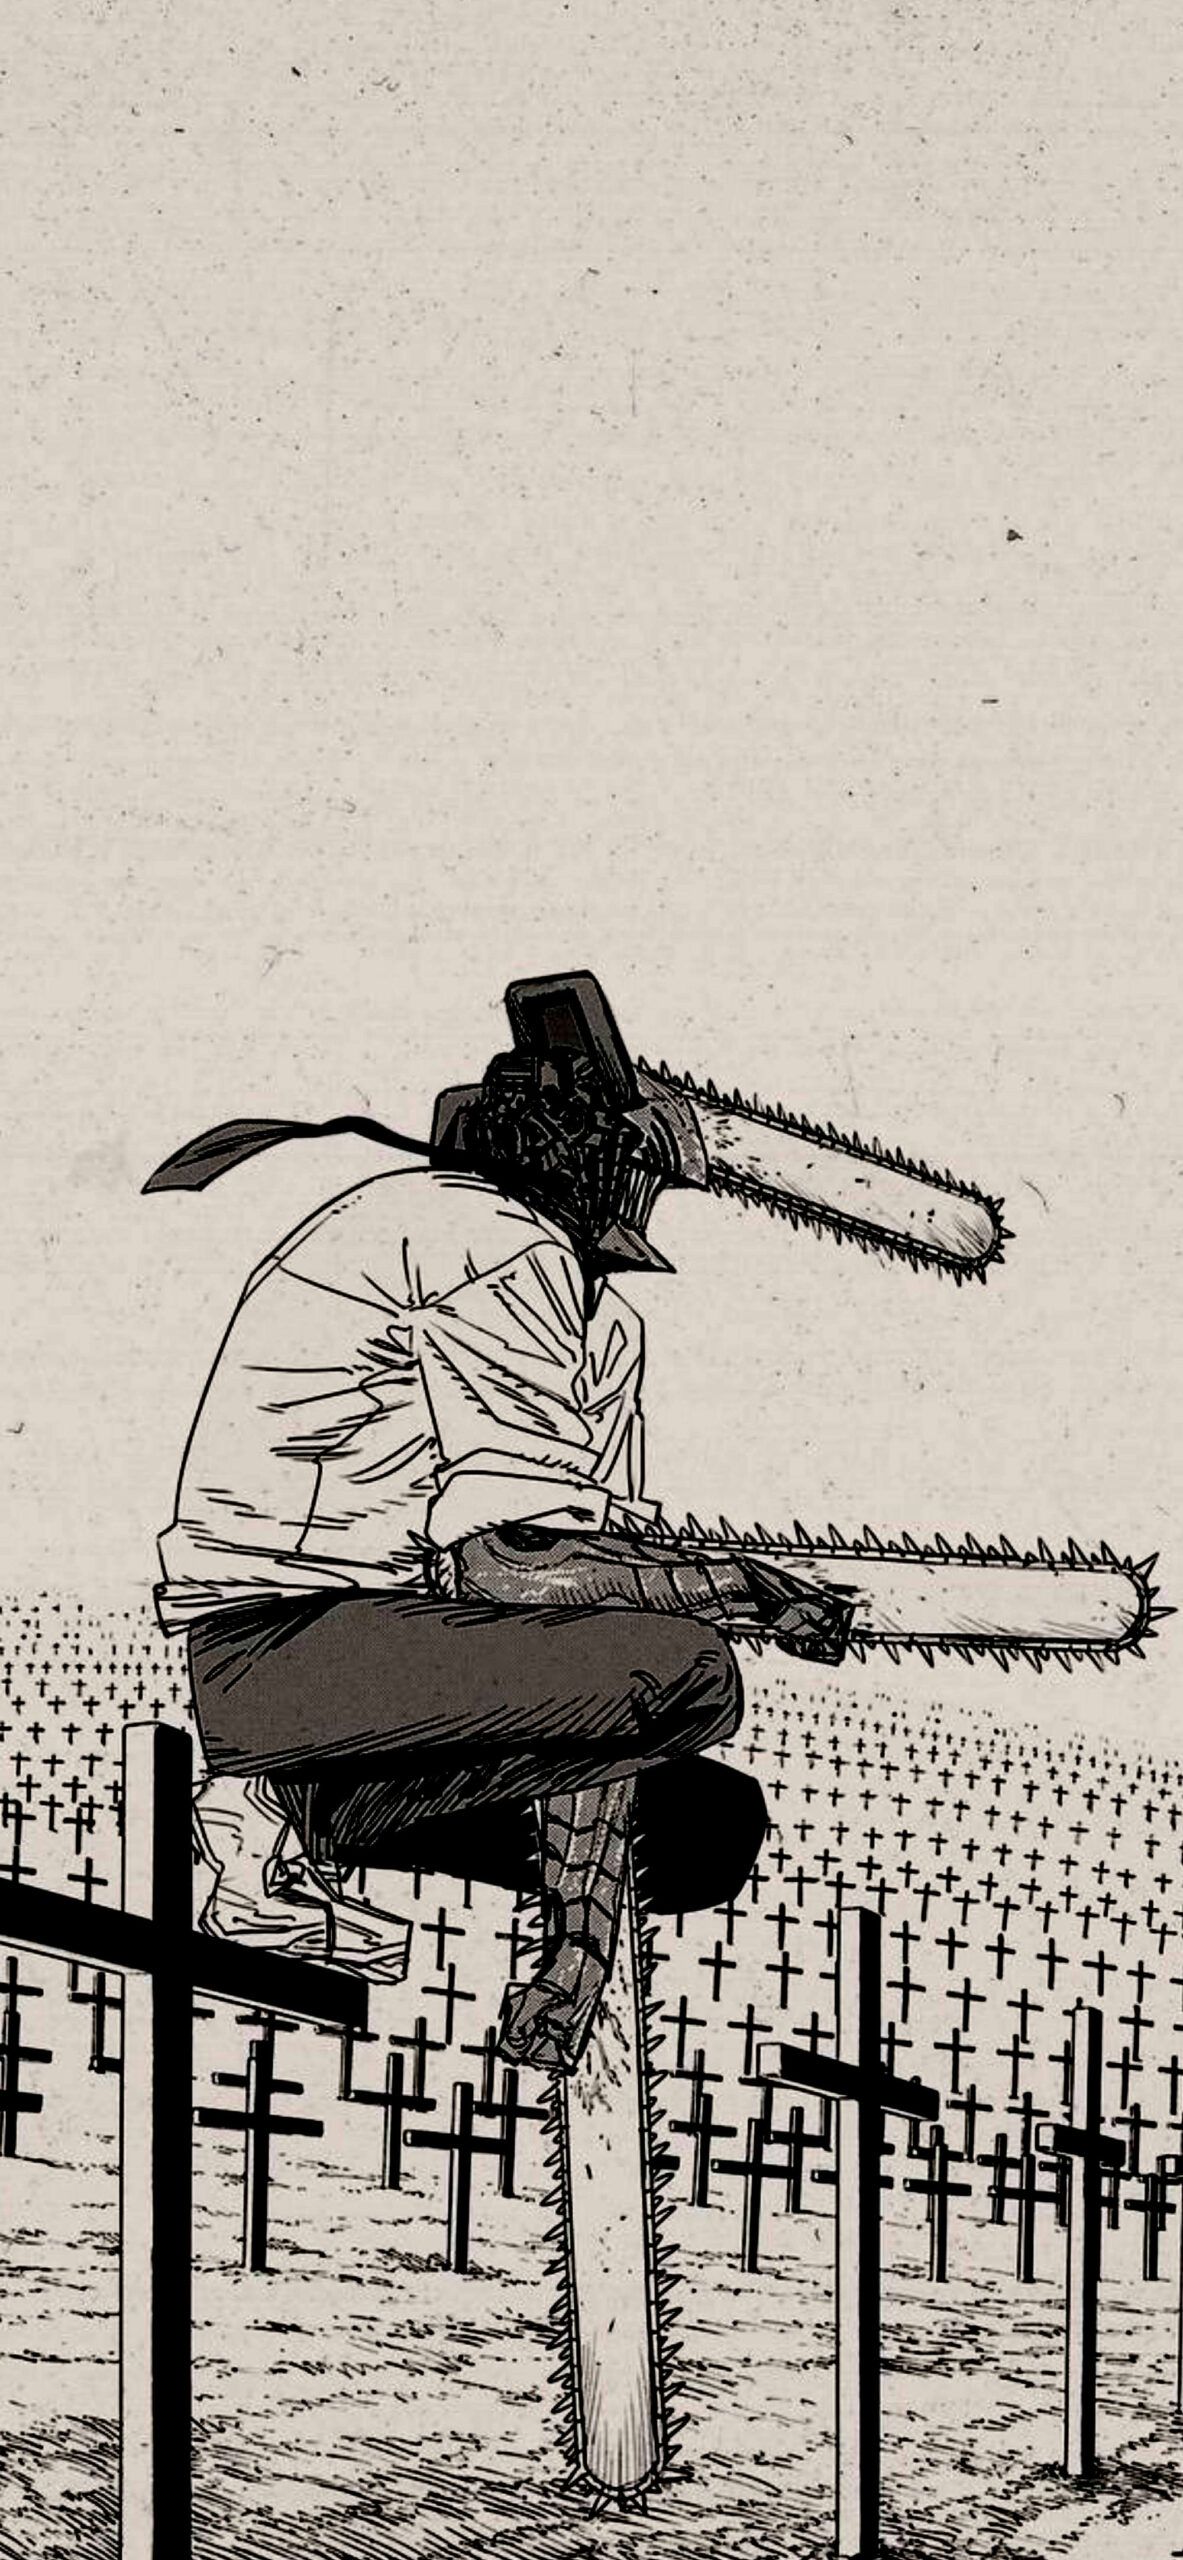 A man with two chainsaws on his head - Cross